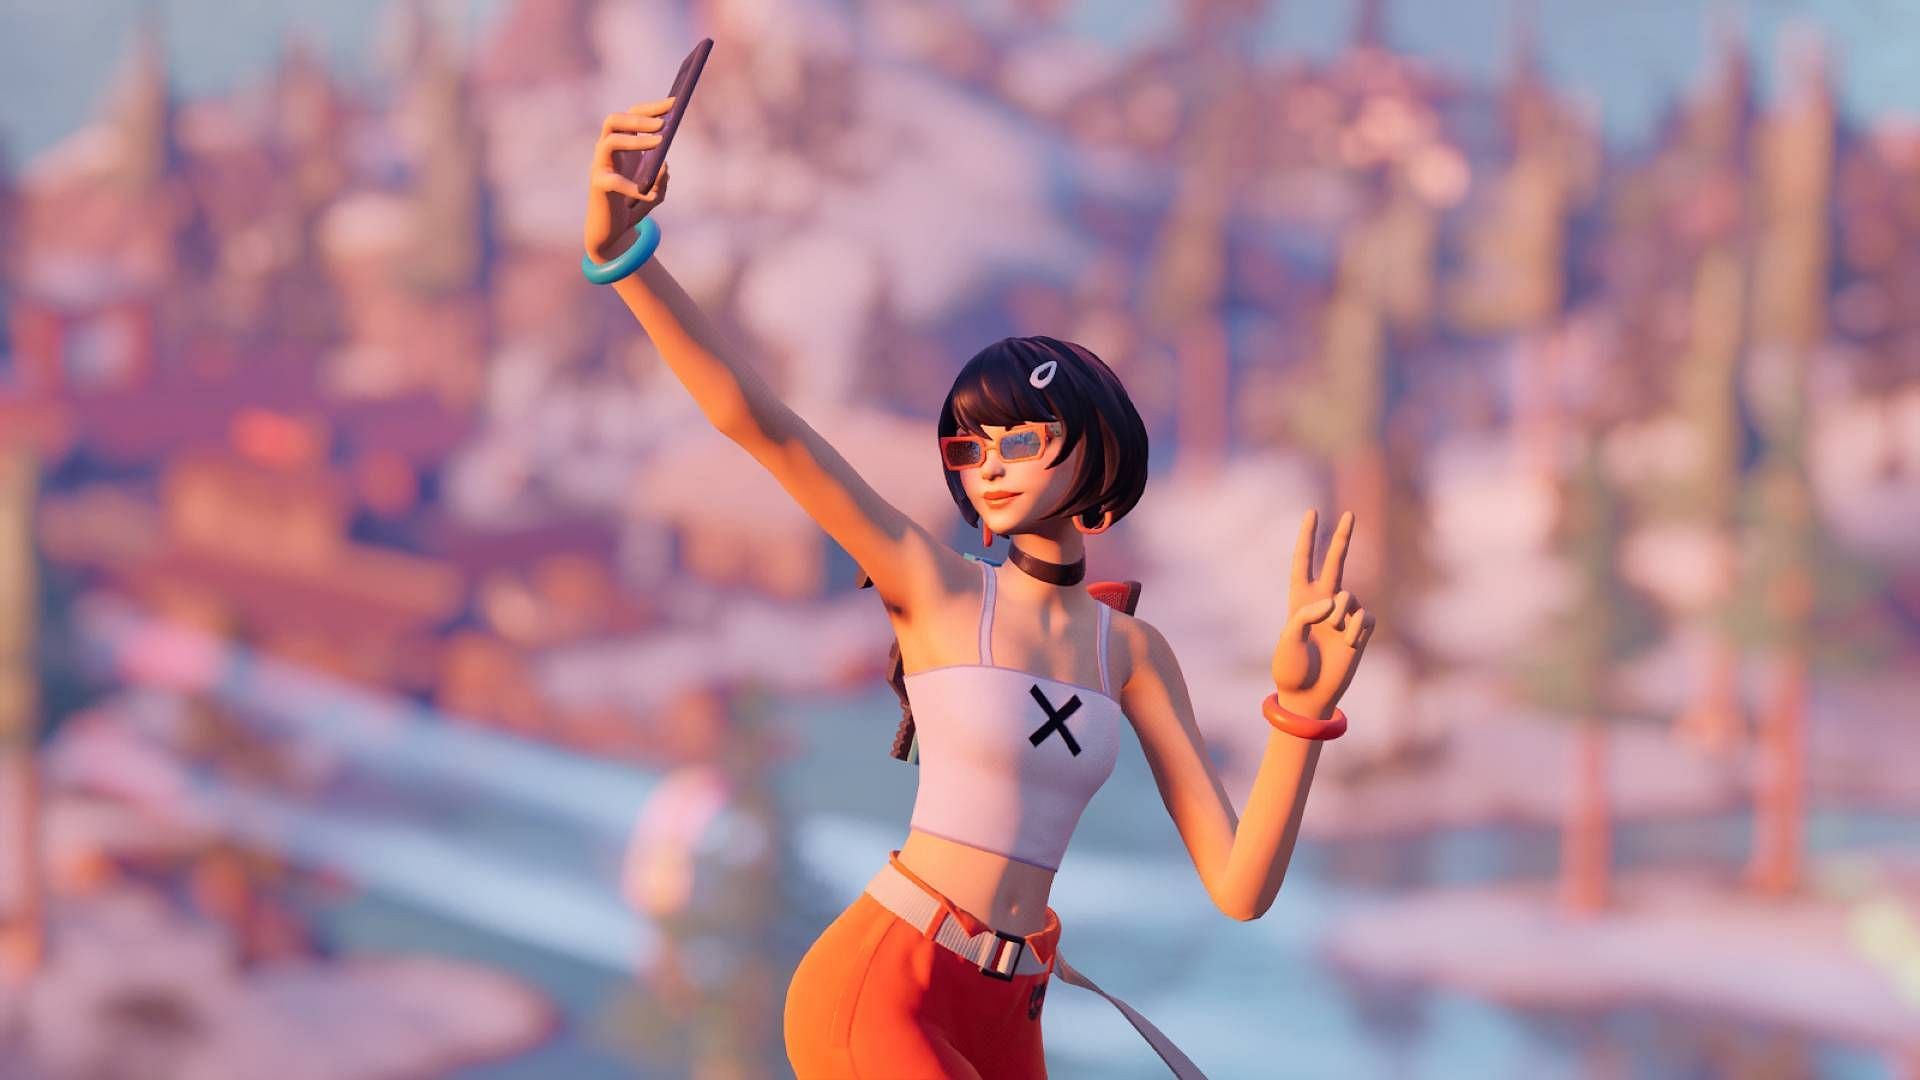 Evie is one of the most recent Fortnite skins that are no longer available (Image via Epic Games)